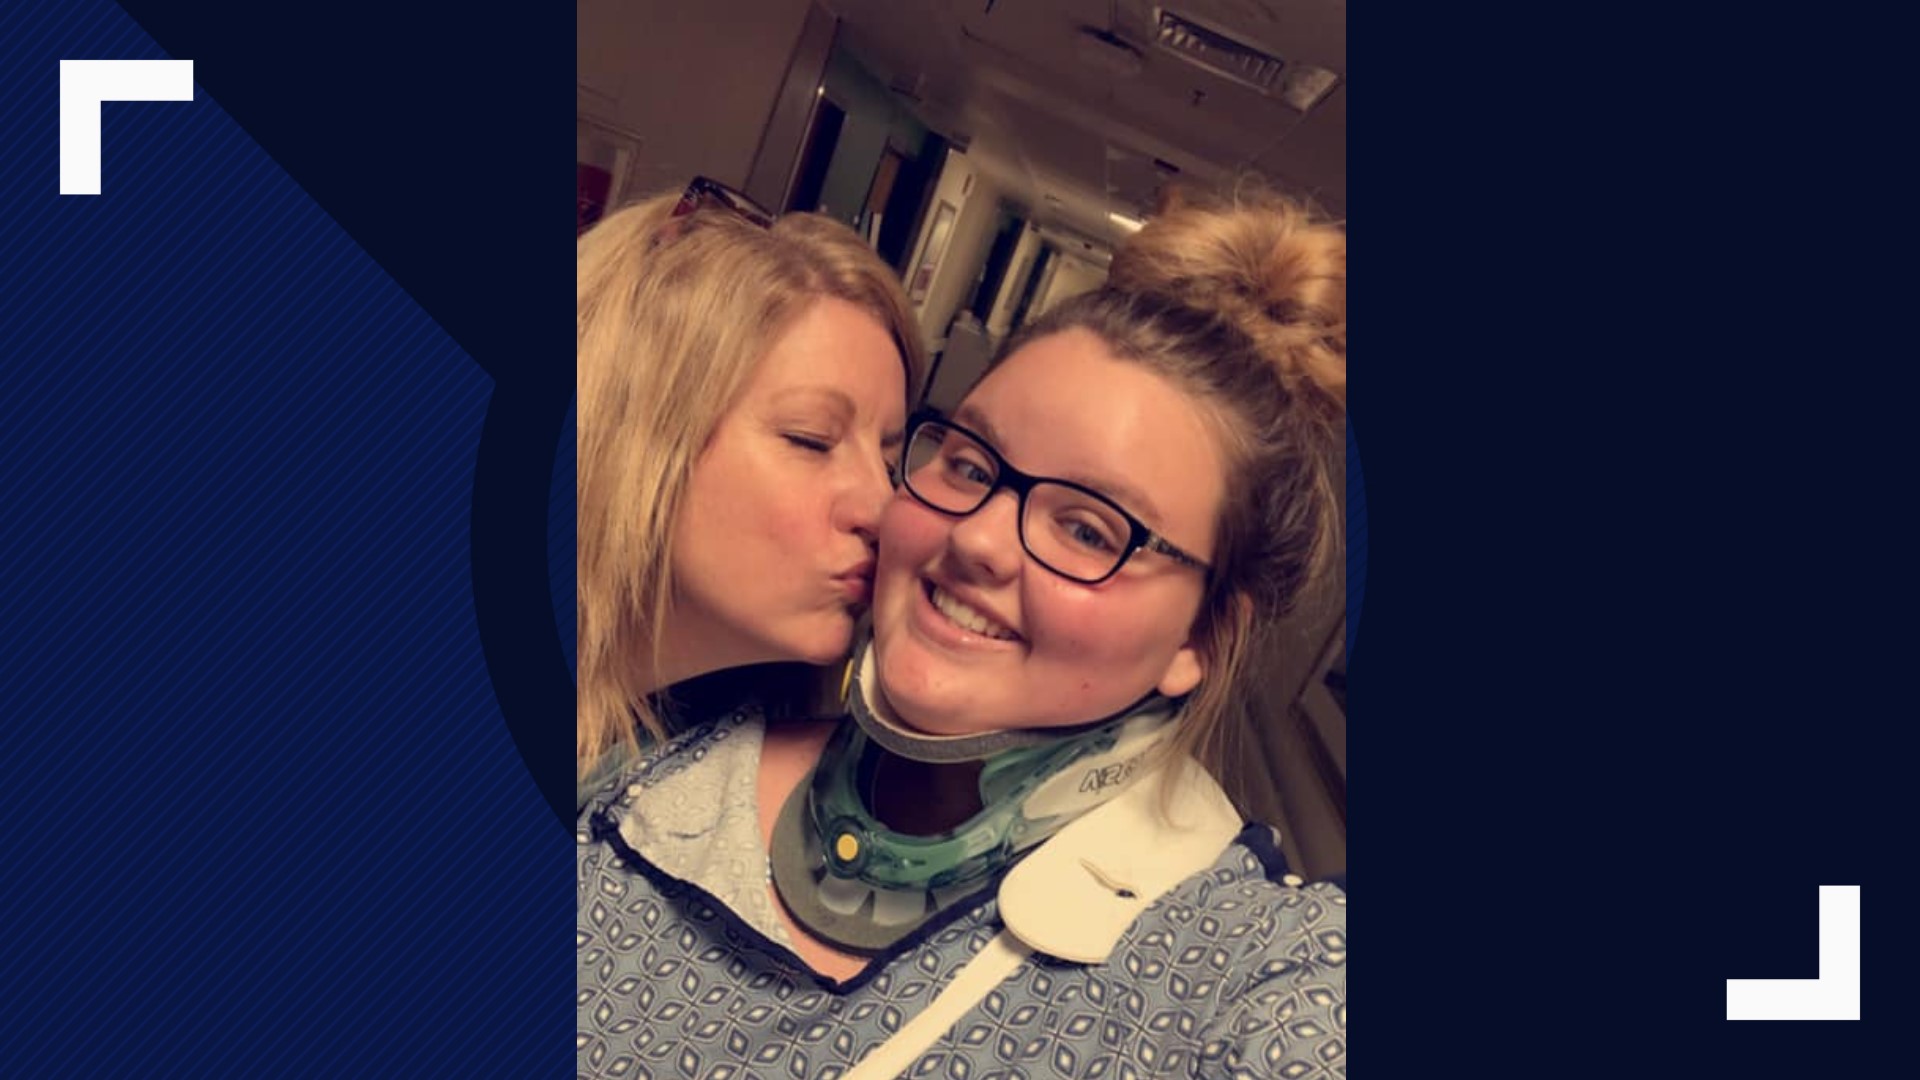 A Surry County teenager is home safe and recovering thanks to her mother. The teen missed curfew and her mom tracked her using an app on her phone and found her pinned under her car. The car had fallen down a 25 foot embankment in Pilot Mountain.